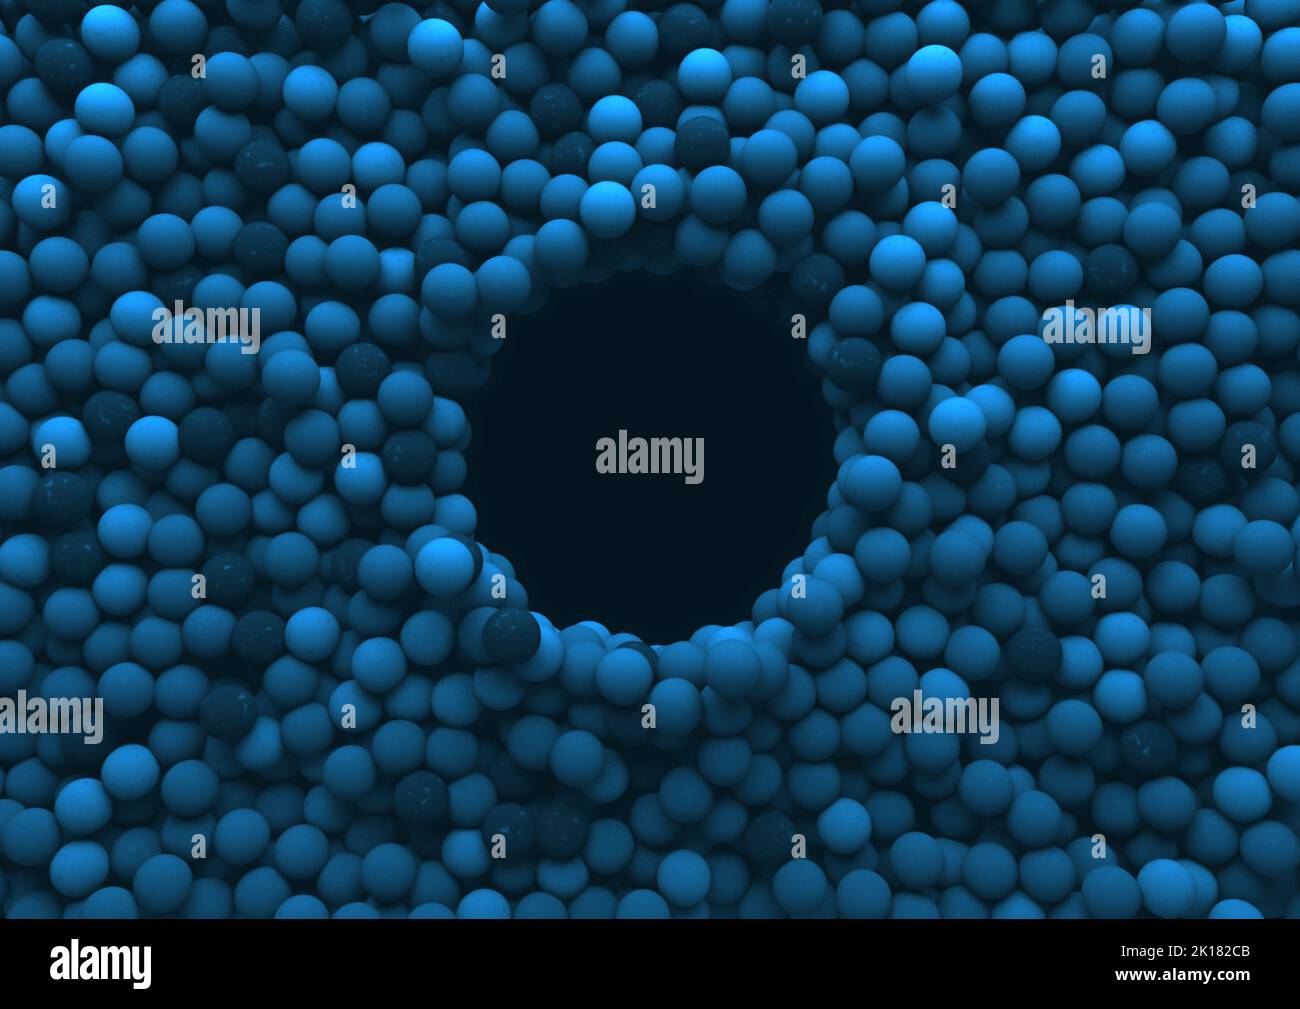 A circular void surrounded by an array of blue rubber balls spread out to form a solid background - 3D render Stock Photo